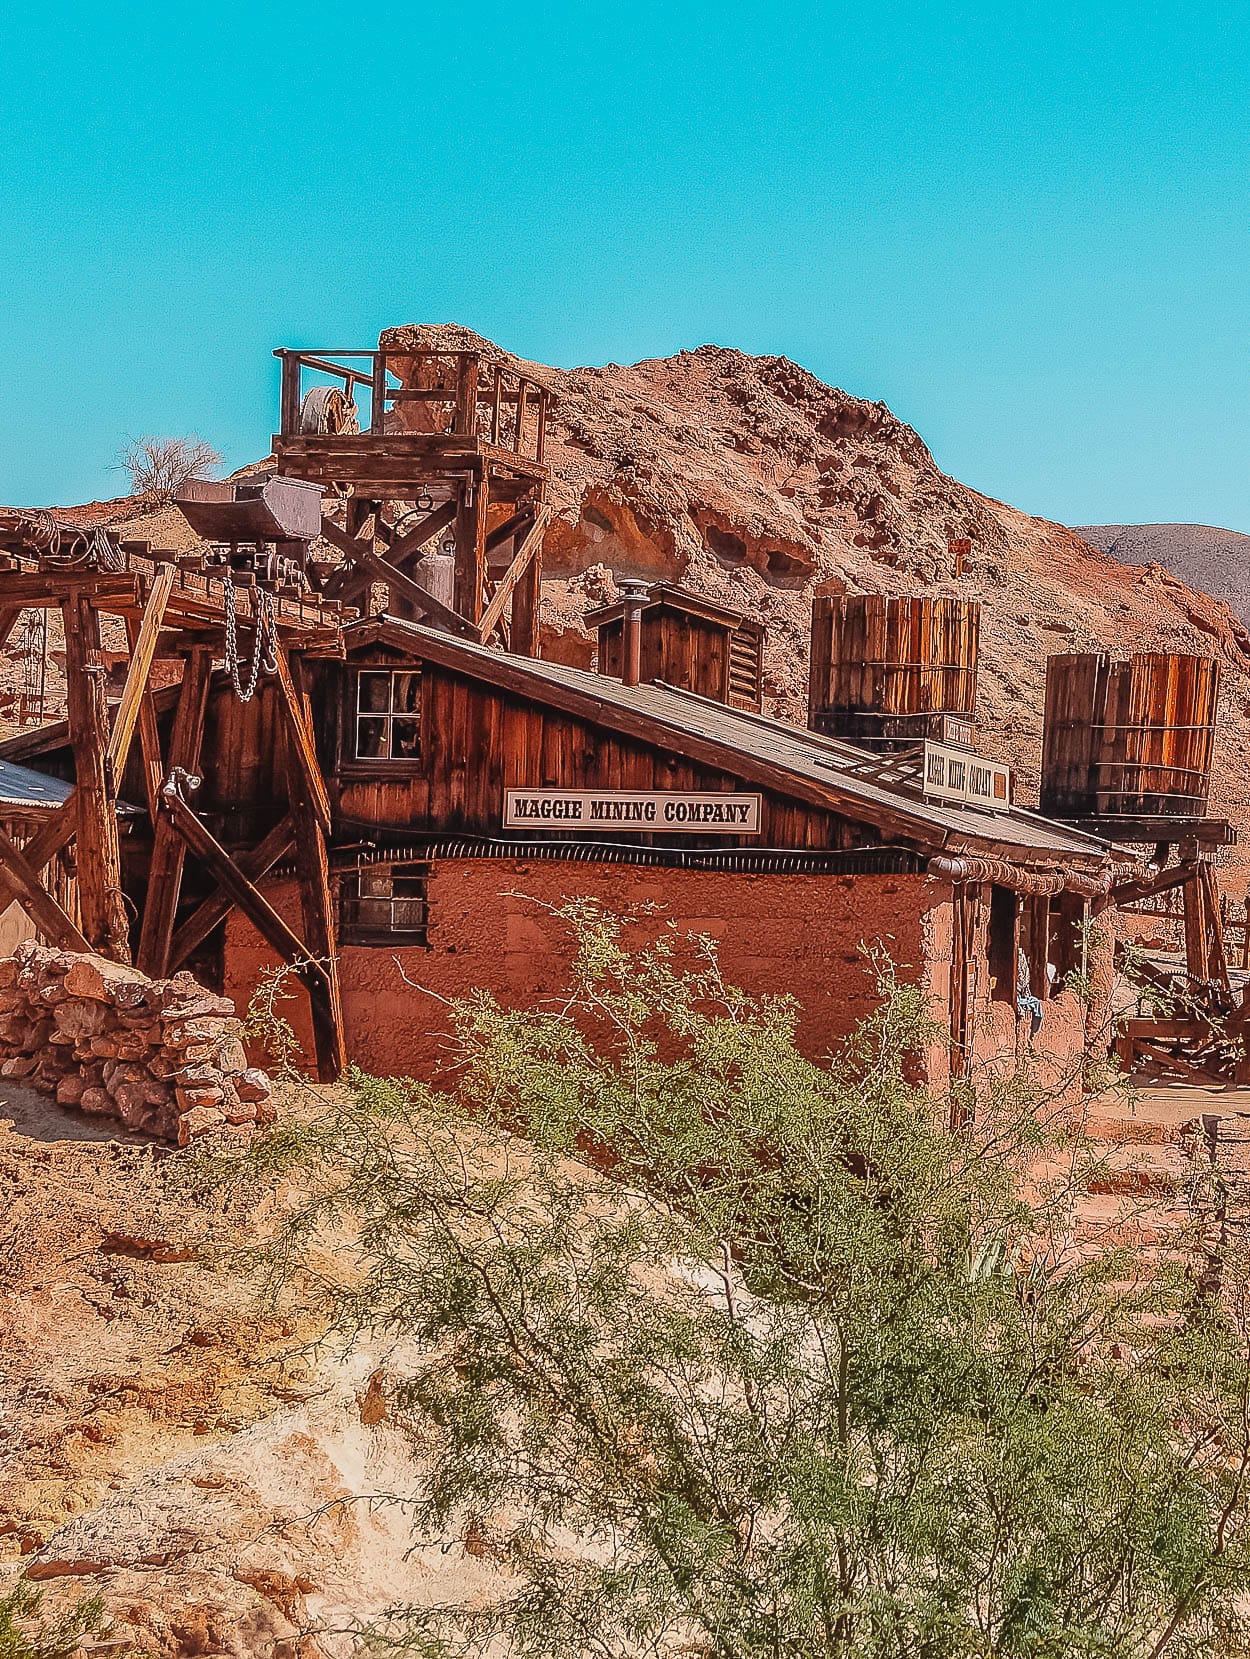 Calico Ghost Town - All You Need to Know BEFORE You Go (with Photos)